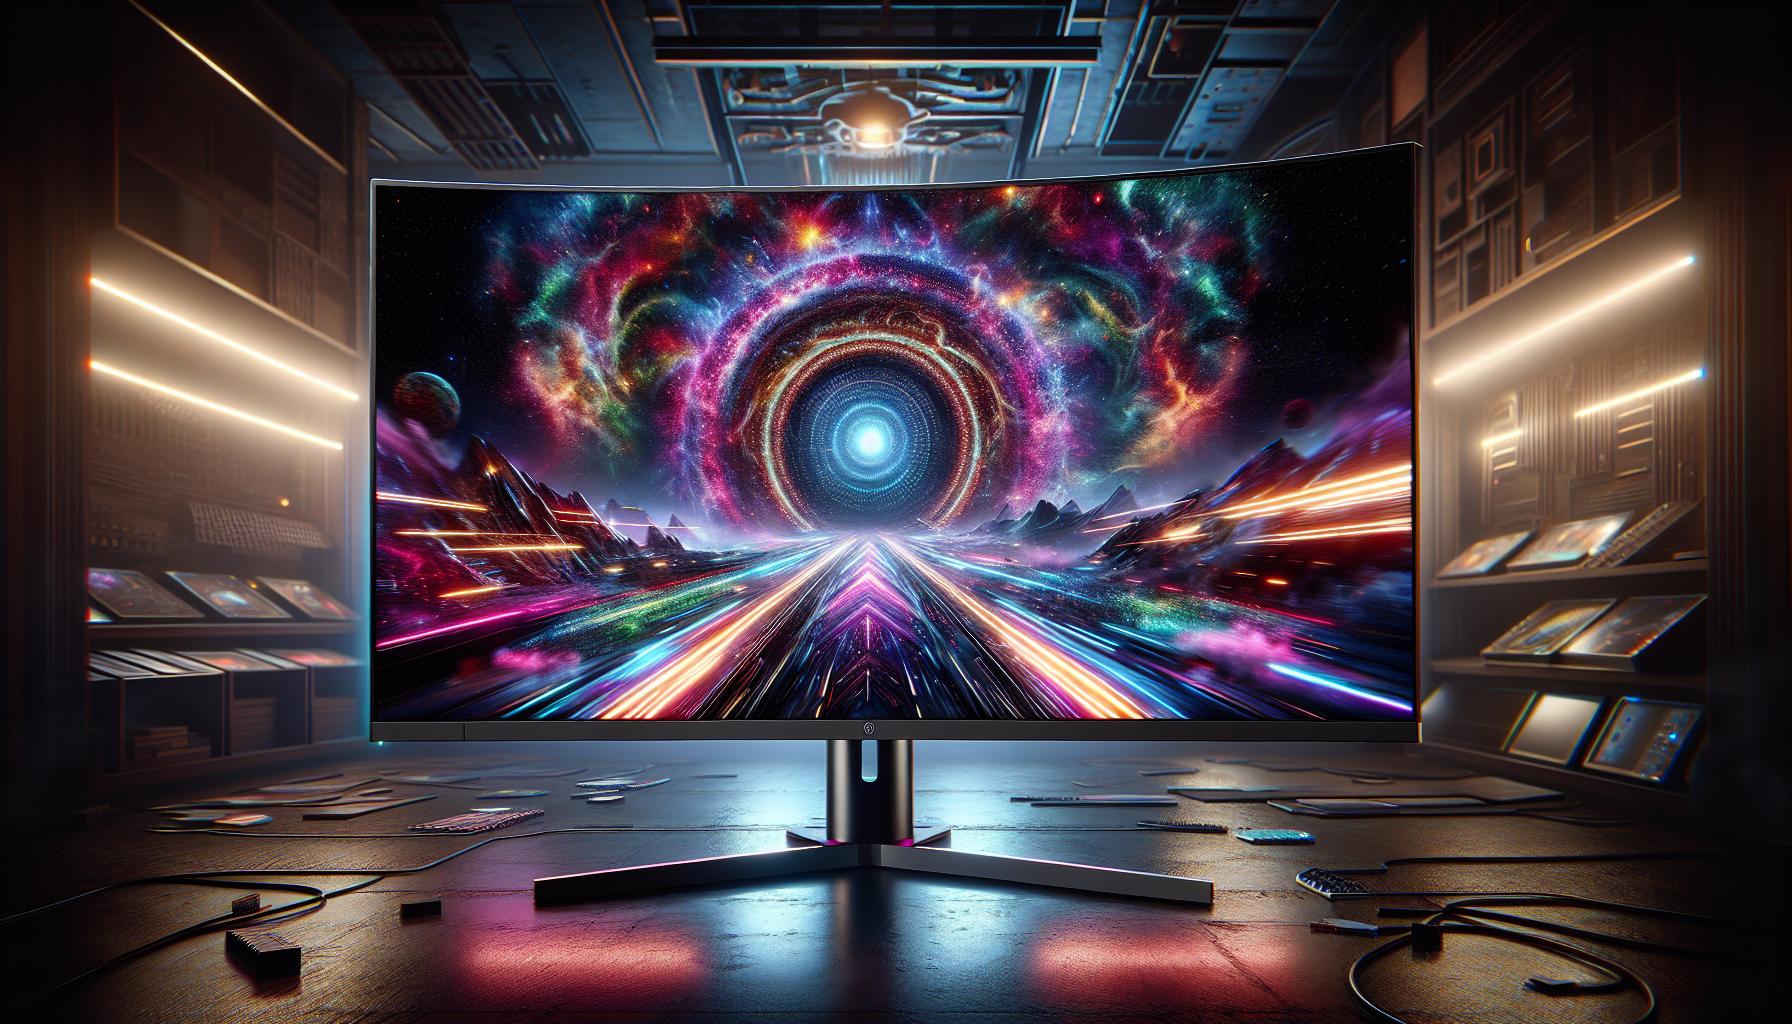 "Save 0 Today on the LG OLED Curved Gaming Monitor" | FinOracle